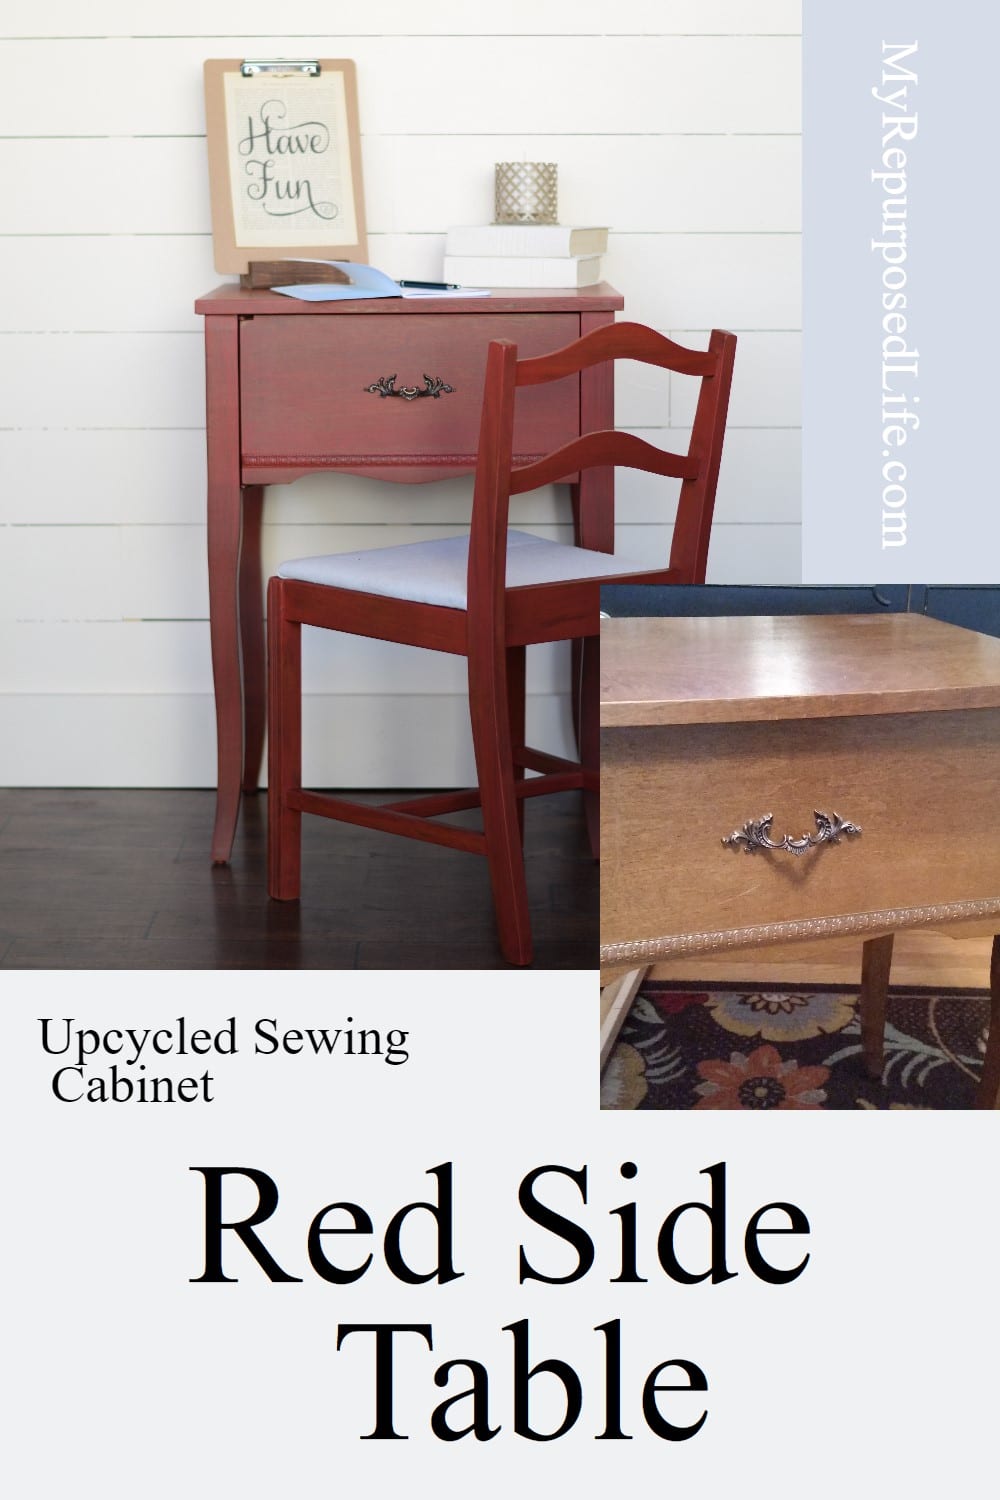 How to turn a sewing cabinet into a fun red side table. The side table paired with a chair makes a great writing desk. Easy project for even a beginner. #MyRepurposedLife #repurposed #furniture #sewing #cabinet #easy #diy #project via @repurposedlife